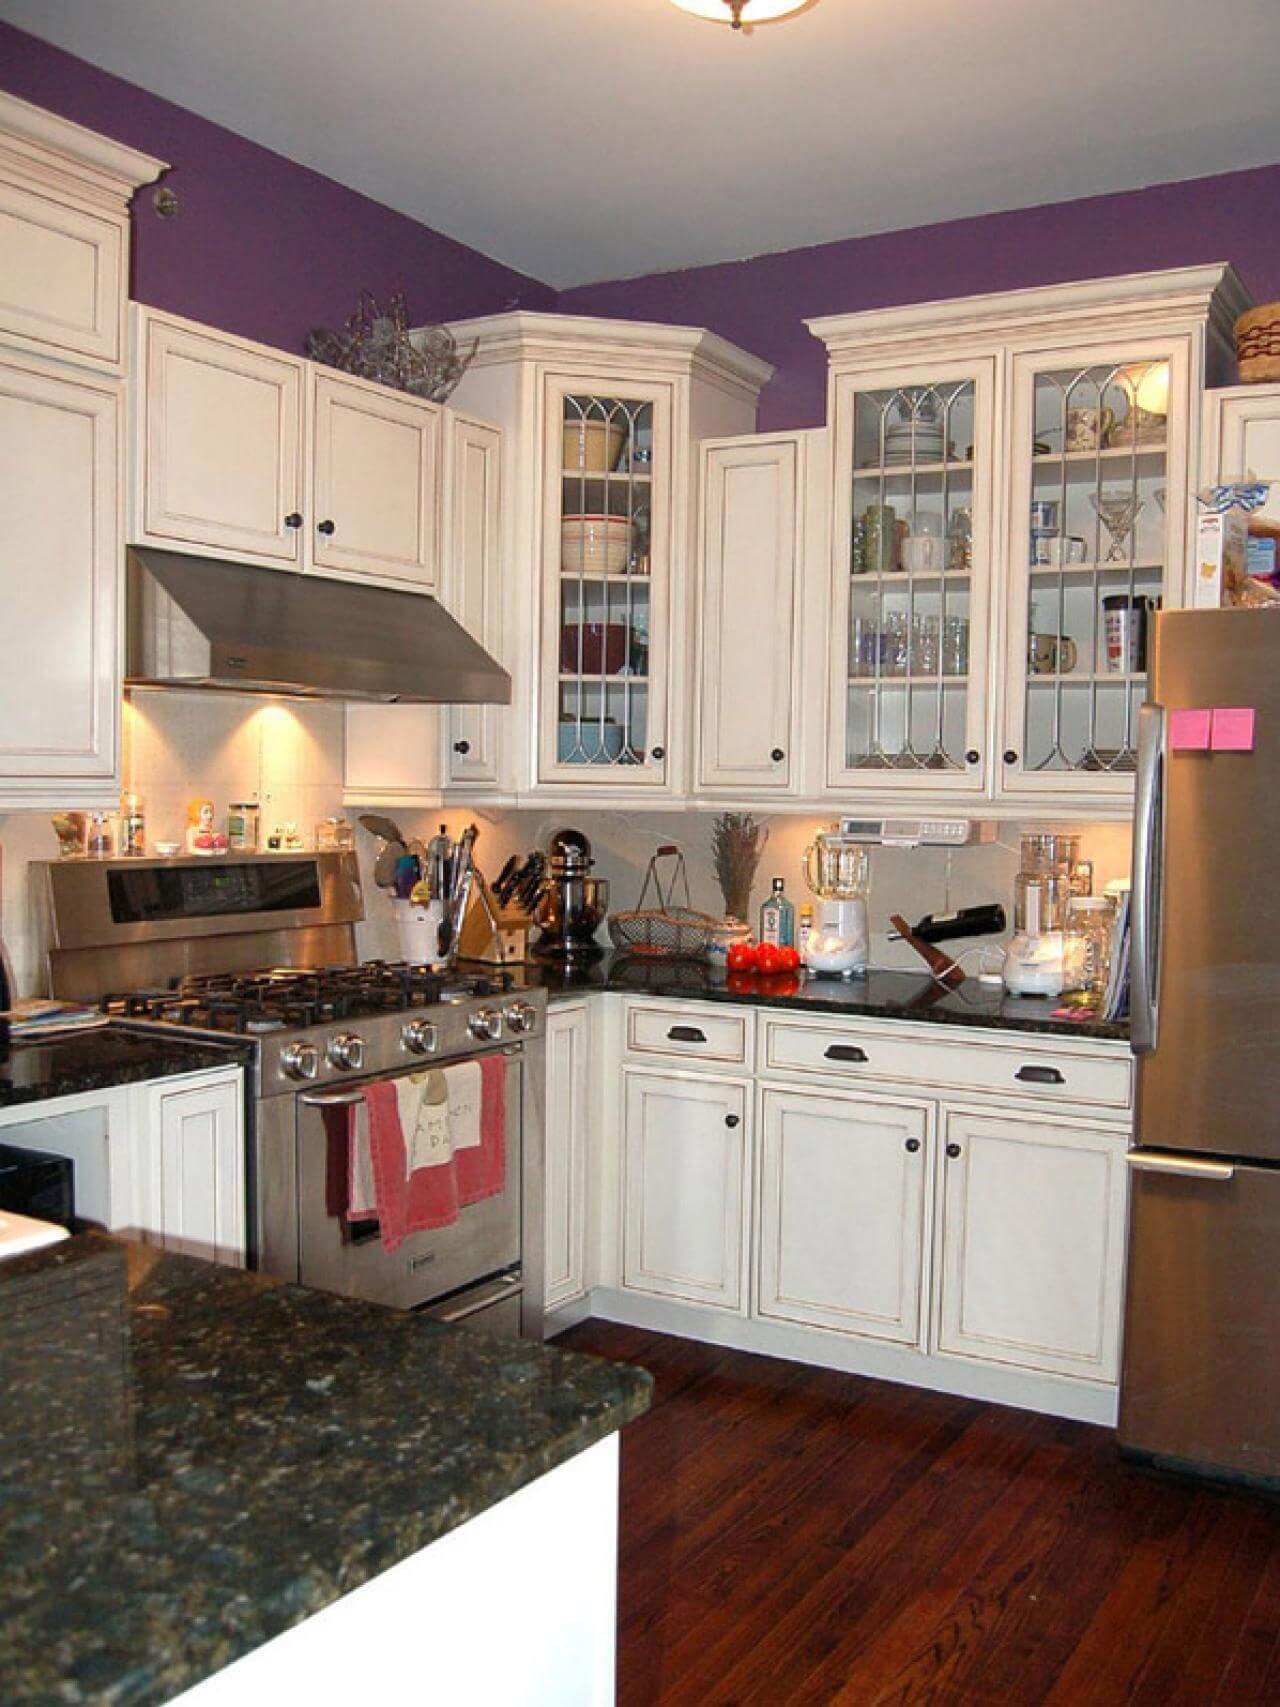 Small Kitchen Colors
 20 Best Colors For Small Kitchen Design AllstateLogHomes